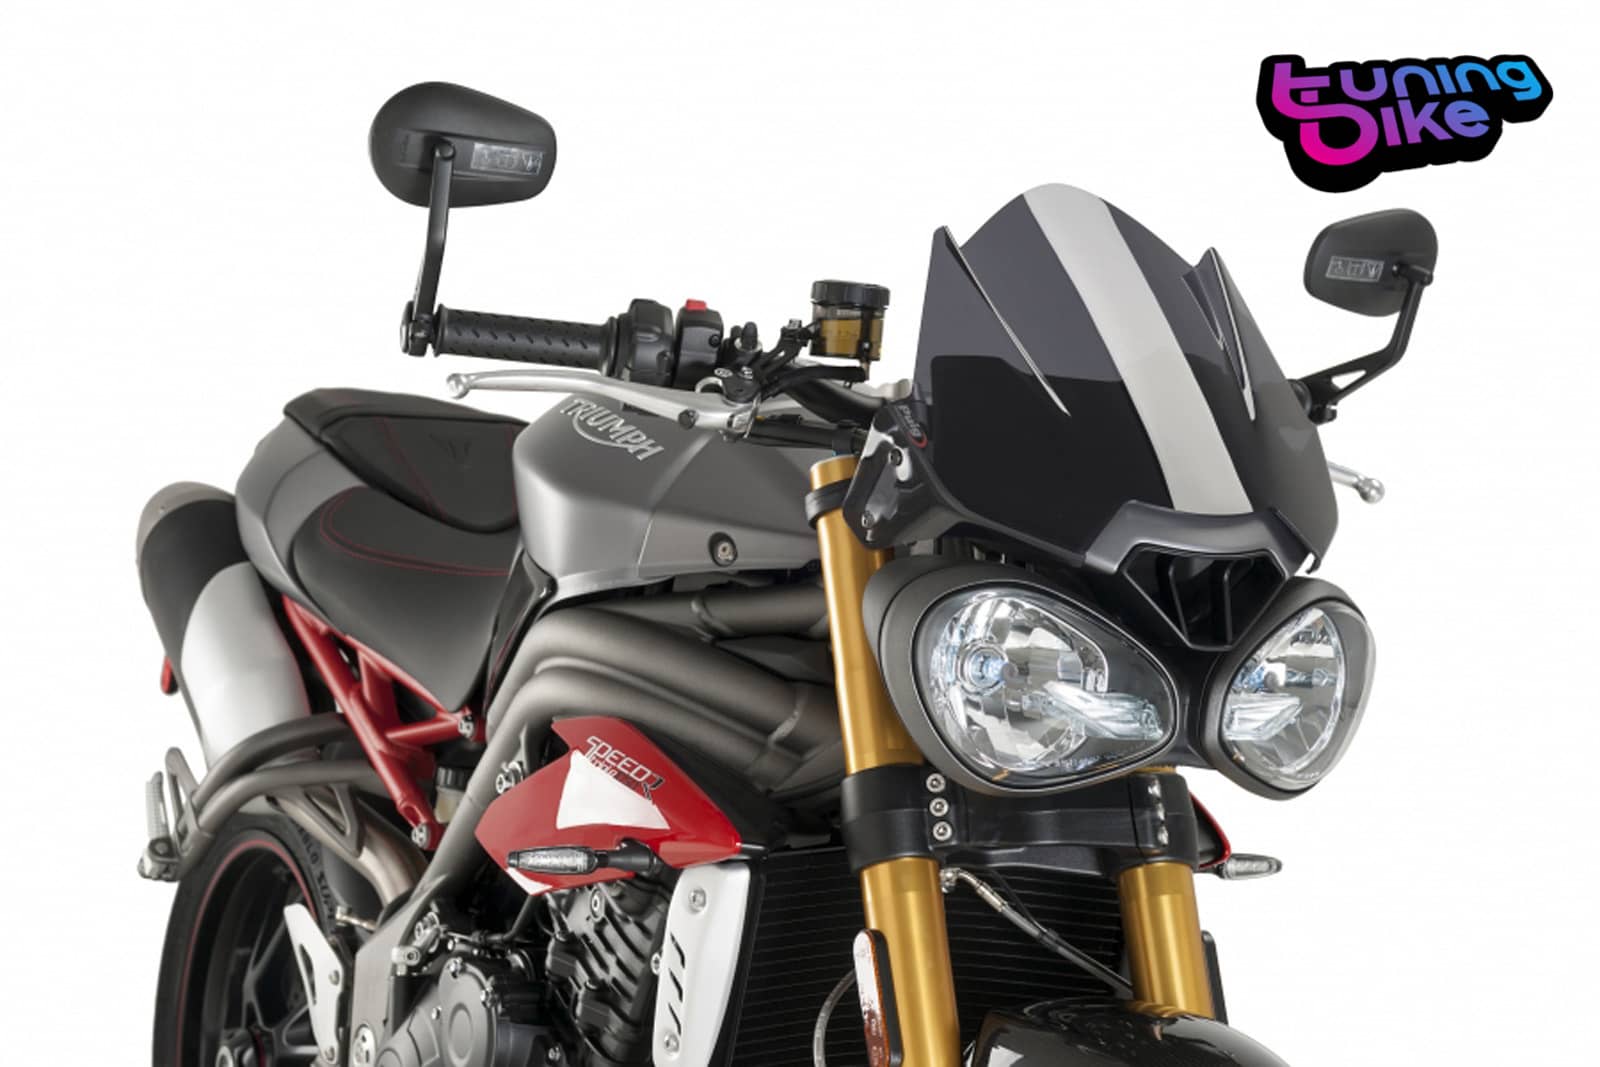 PUIG CUPOLINO NAKED N.G. SPORT PER TRIUMPH SPEED TRIPLE 2018 FUME SCURO